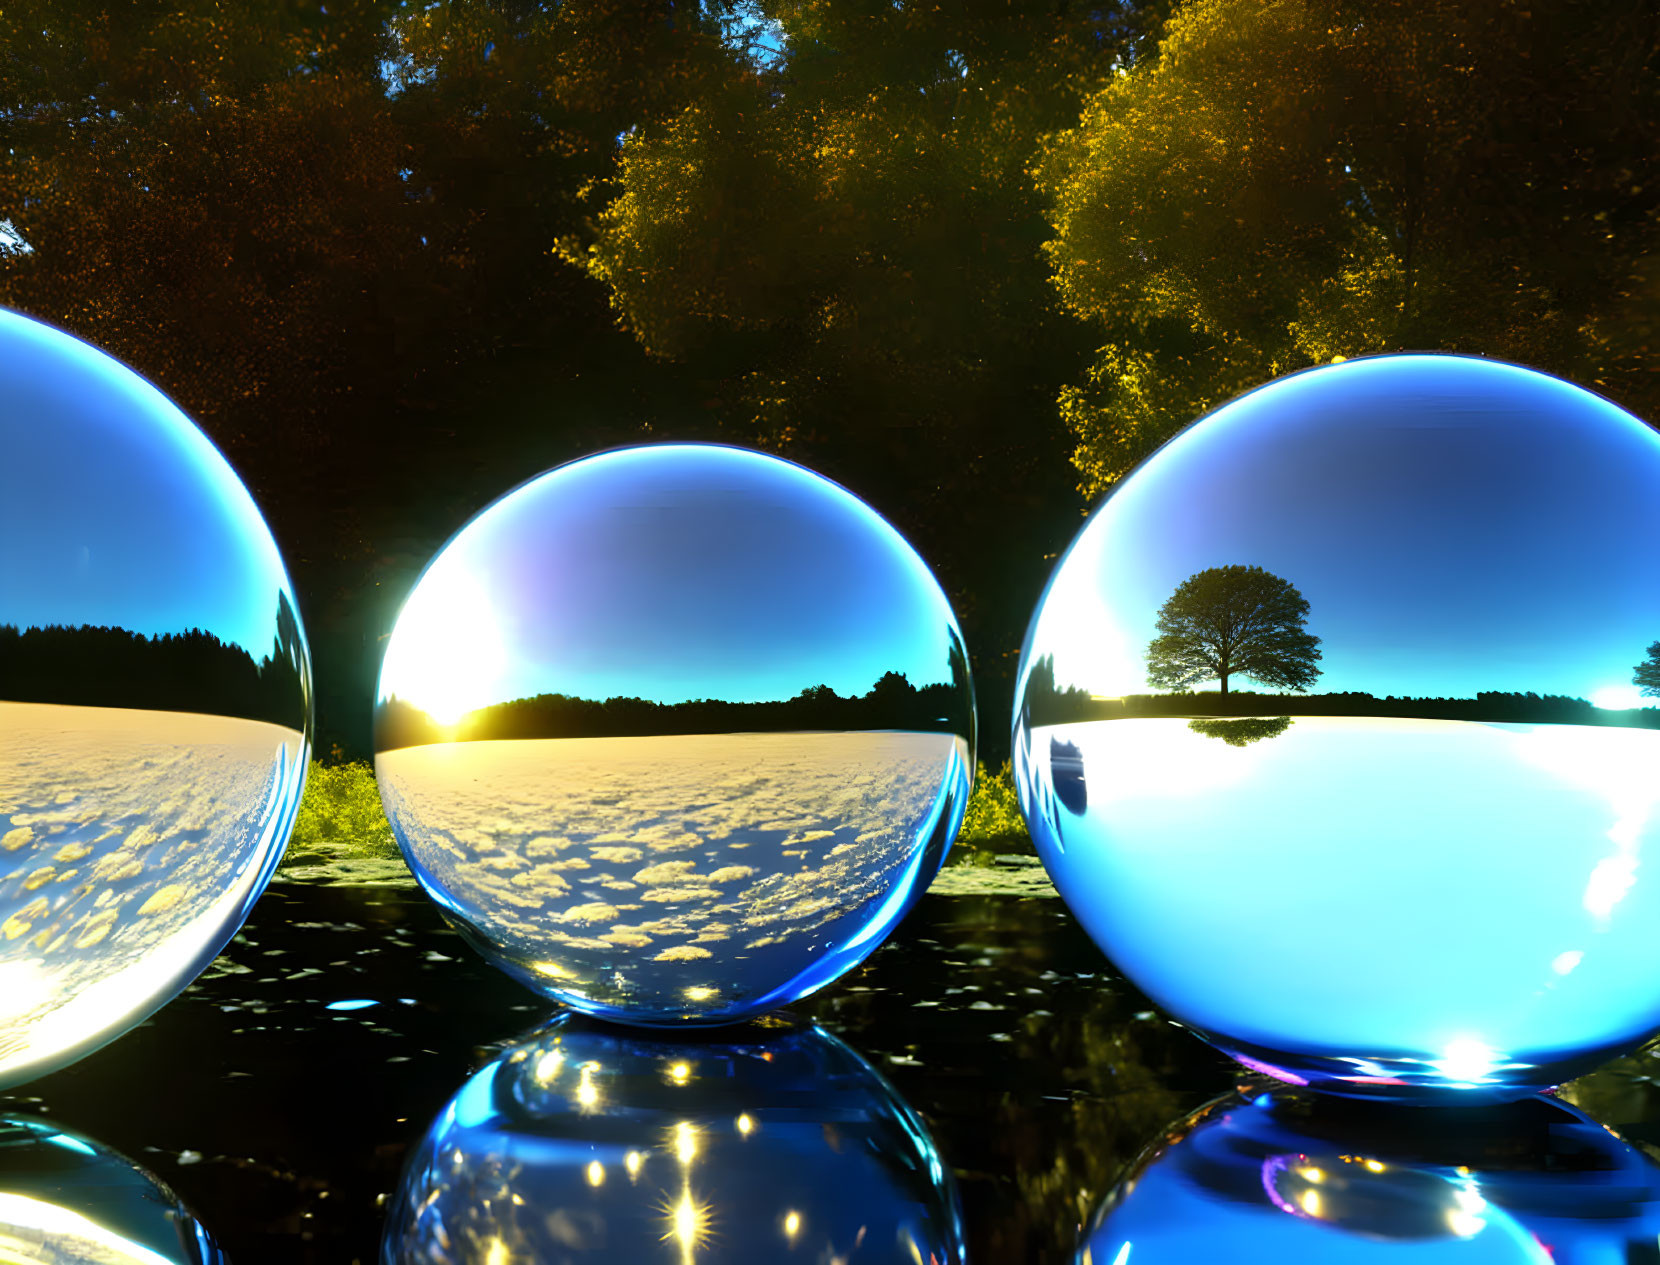 Reflective Spheres on Glossy Surface with Distorted Landscape and Sun Glare